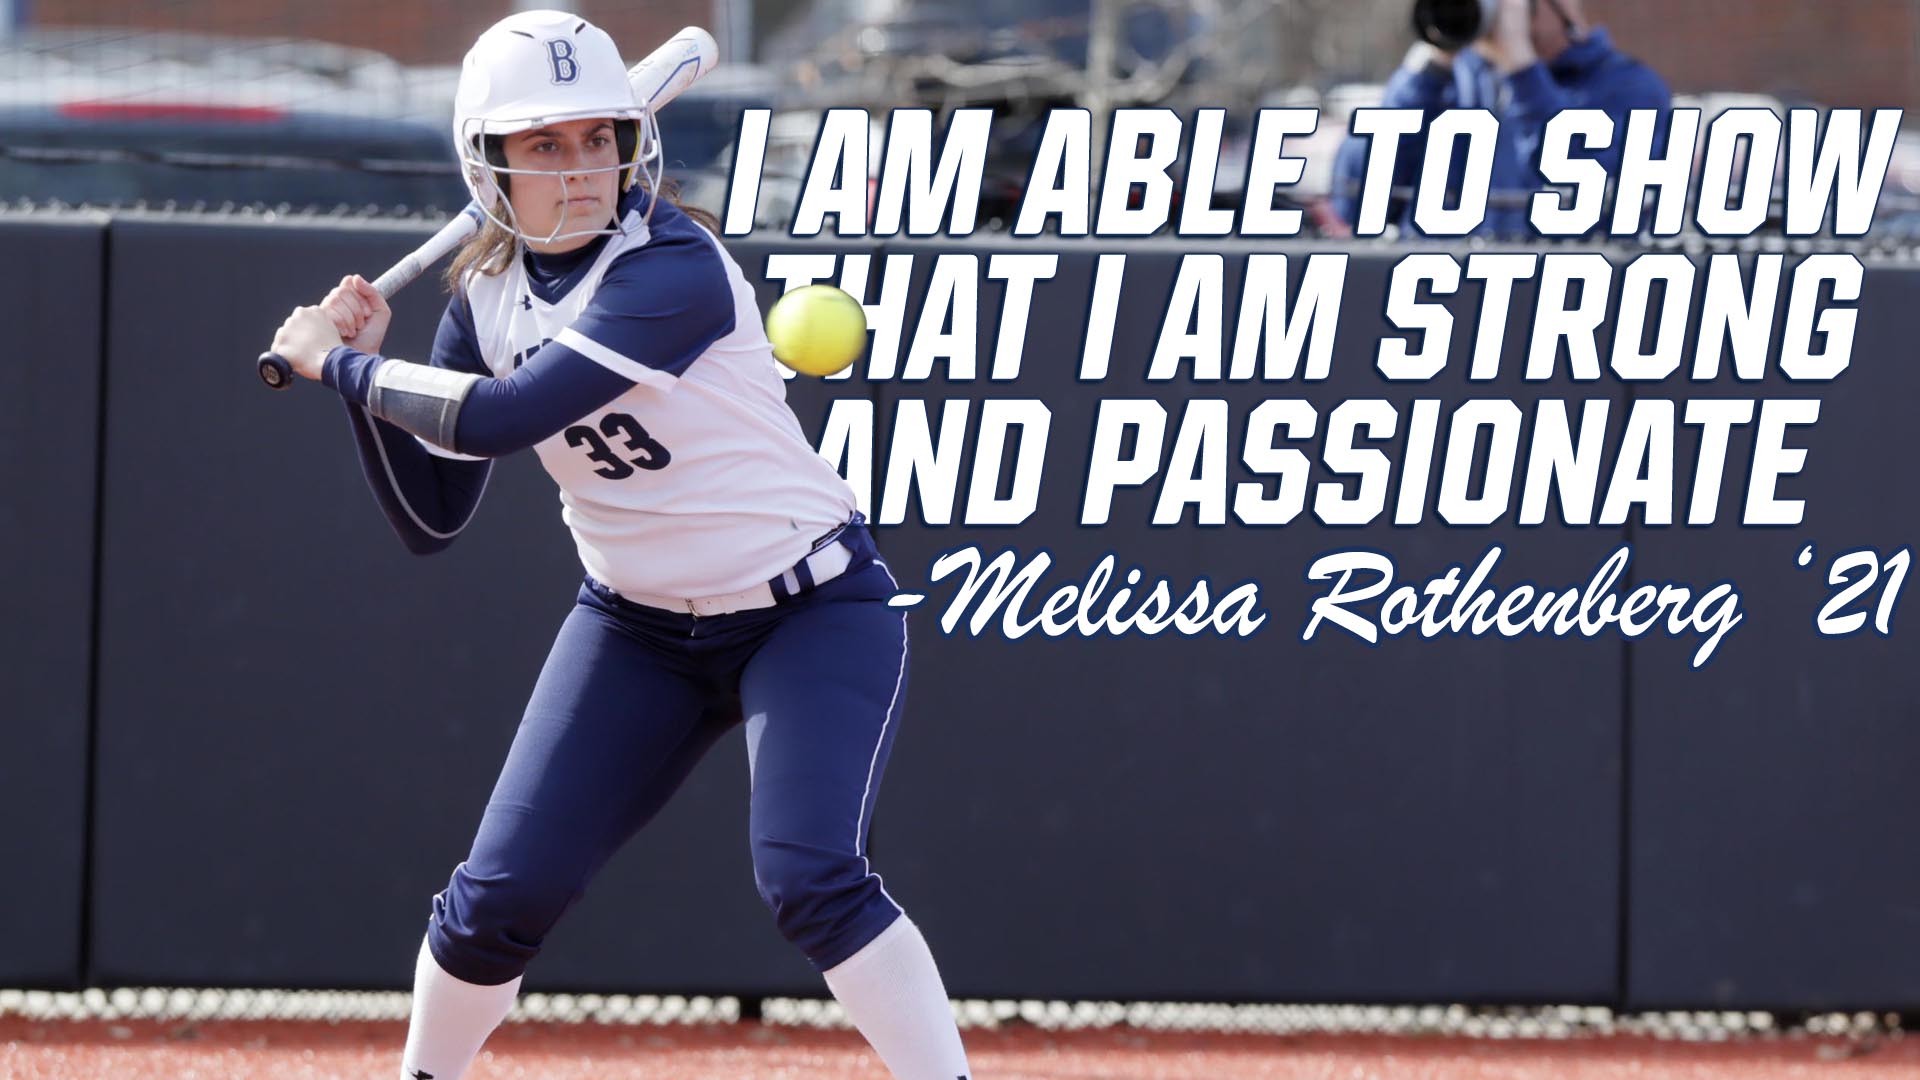 Softball player Melissa Rothenberg in the batter's box with text: I am able to show that I am strong and passionate. 